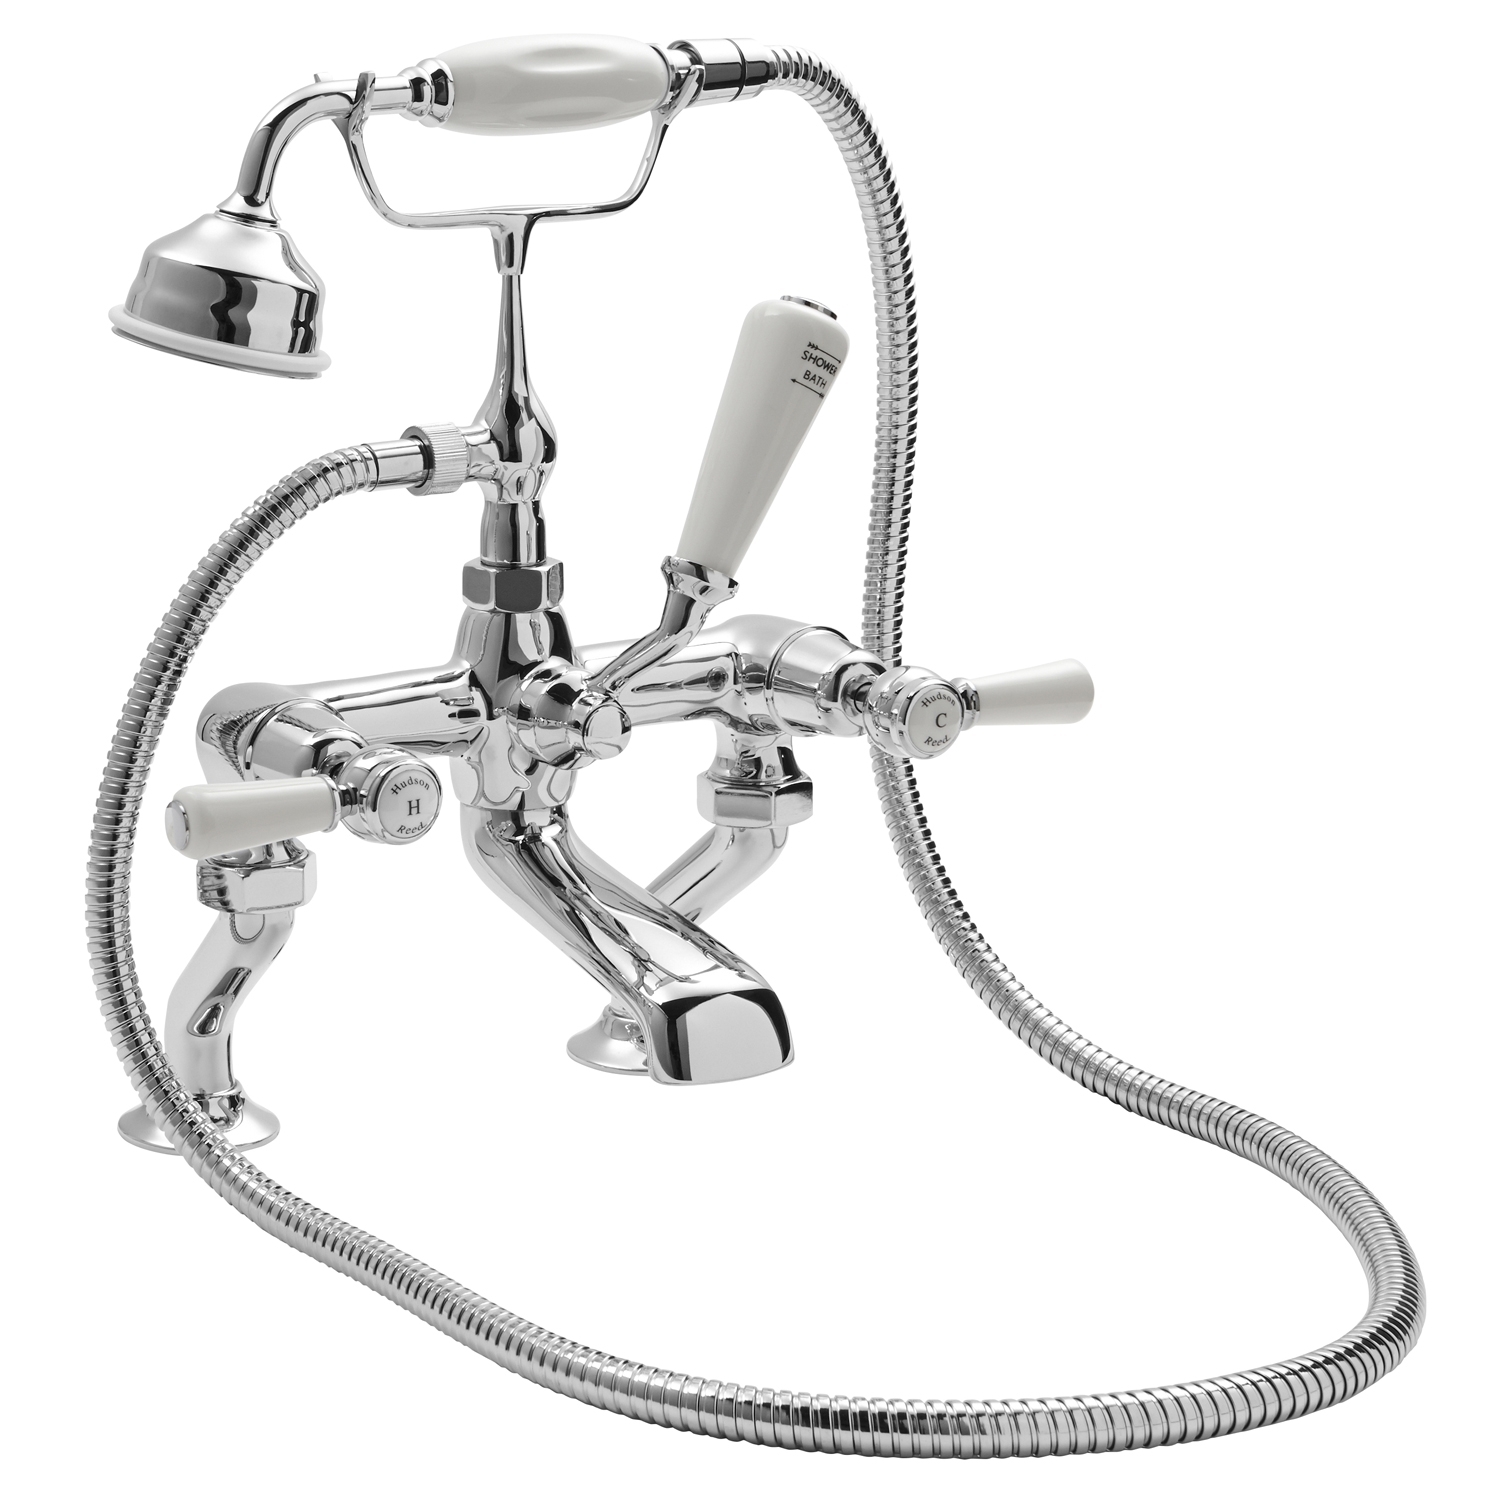 Hudson Reed Traditional Pillar Mounted Topaz Lever Bath Shower Mixer Tap - Chrome - BC304DL 